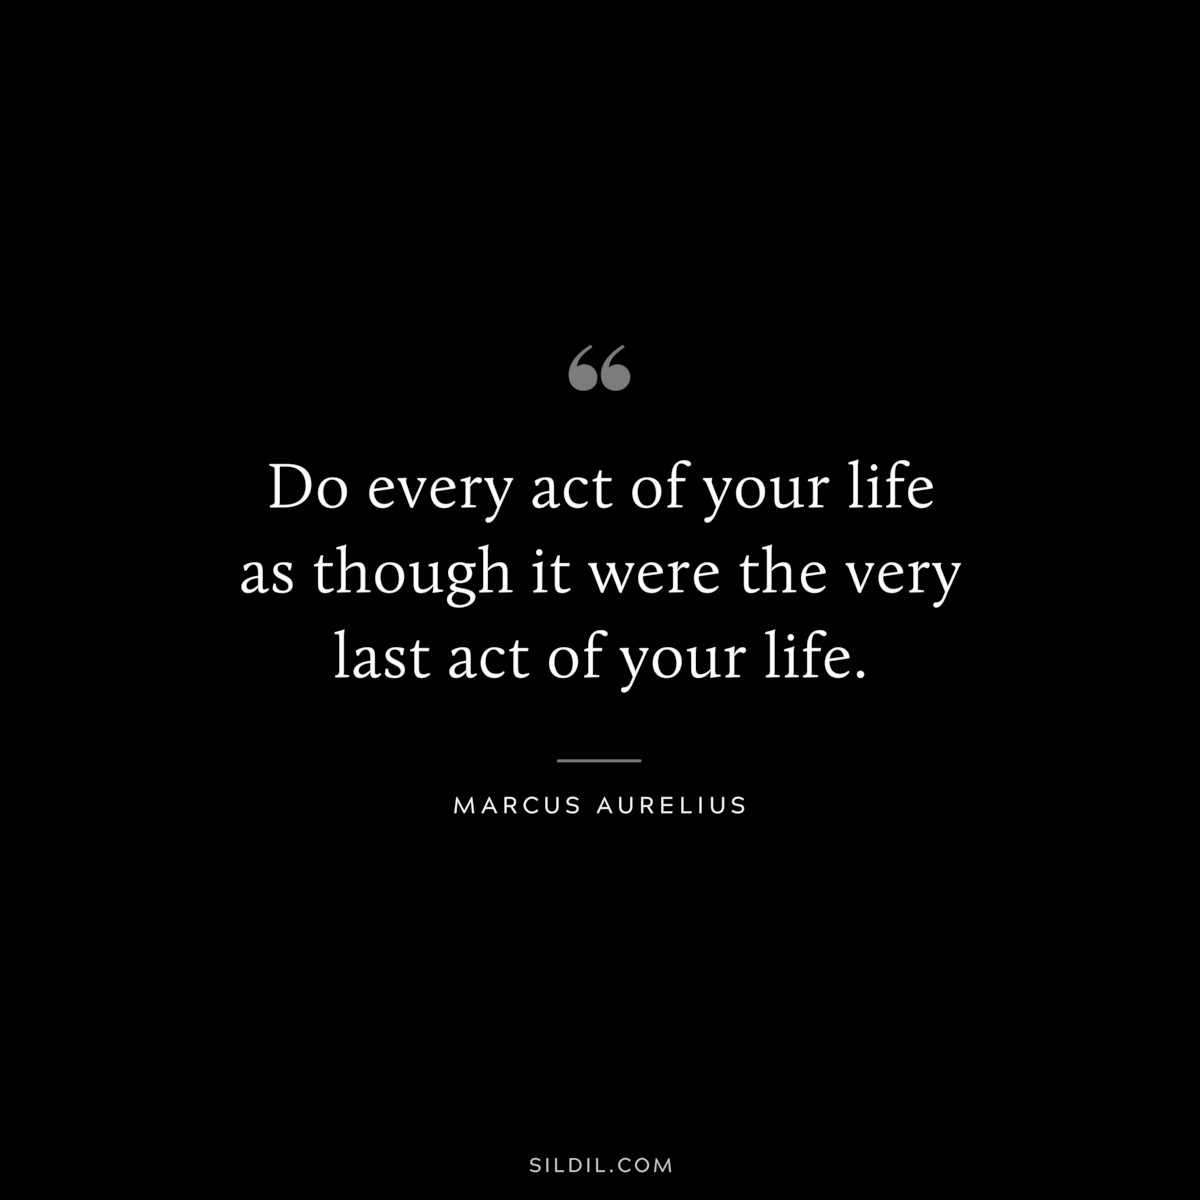 Do every act of your life as though it were the very last act of your life. ― Marcus Aurelius